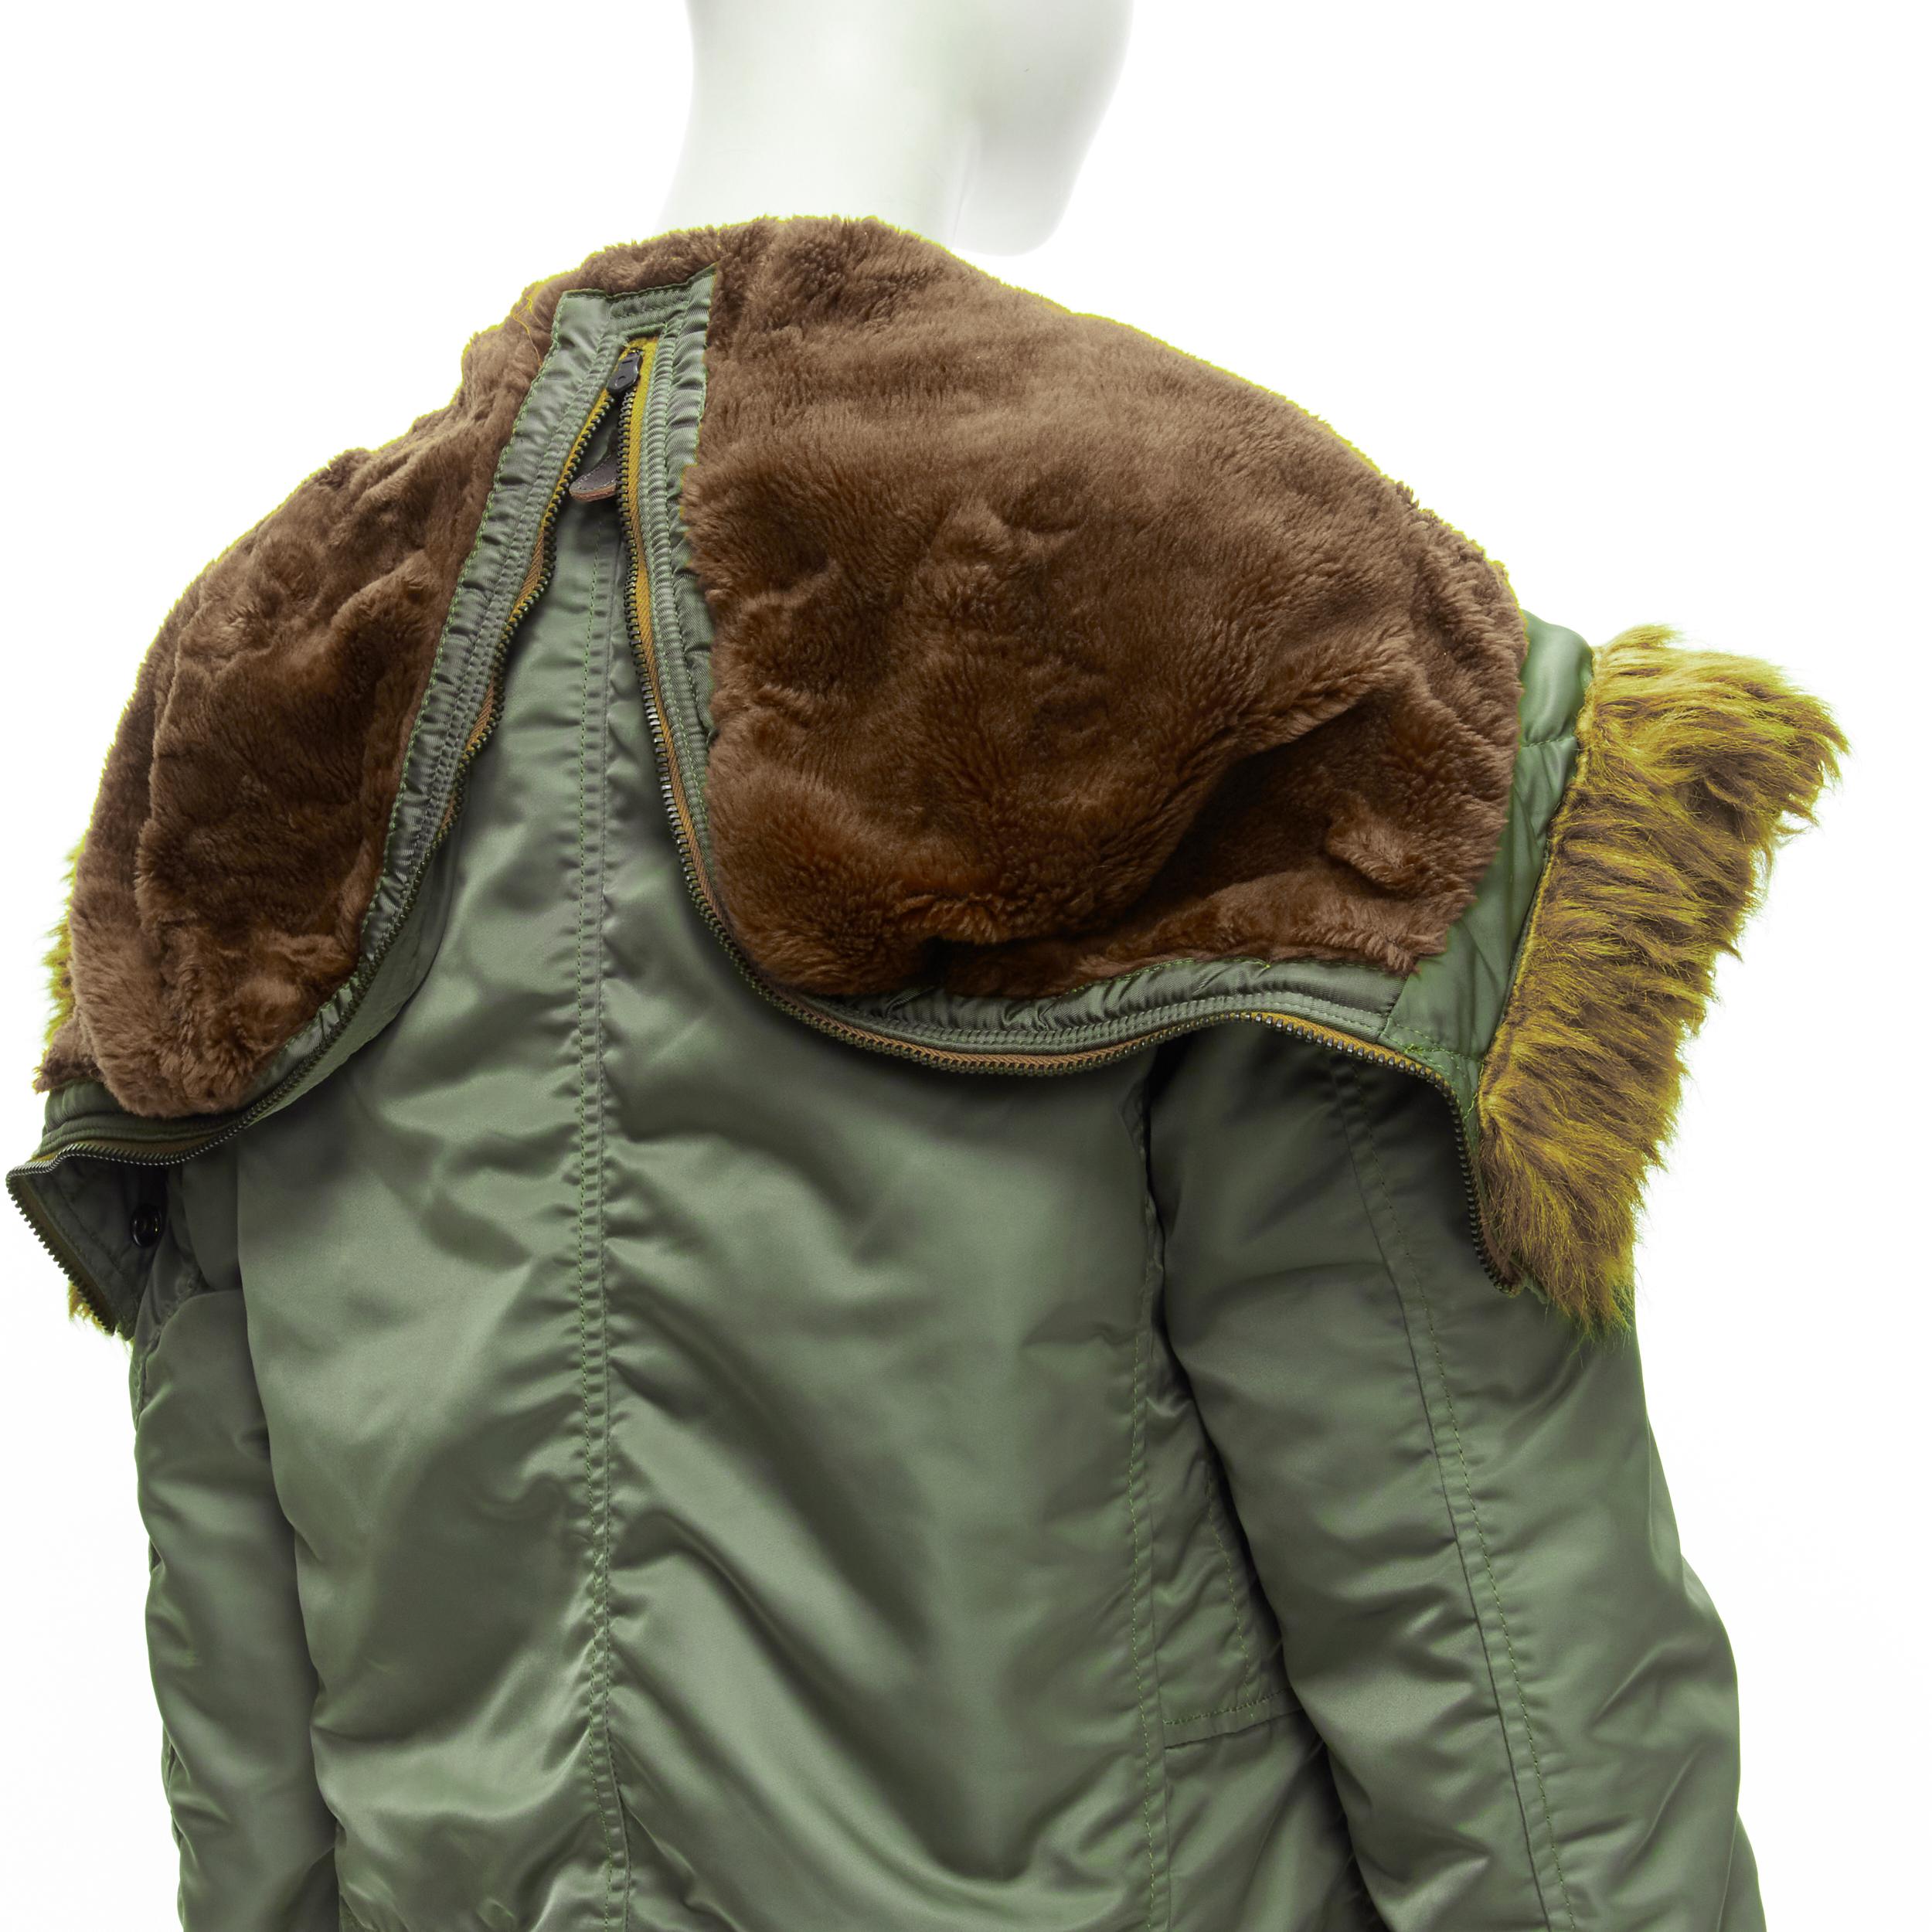 JUNYA WATANABE 2006 brown faux fur hood green padded safari army coat XS
Reference: TGAS/C01680
Brand: Junya Watanabe
Designer: Junya Watanabe
Collection: 2006
Material: Nylon, Polyester
Color: Green, Brown
Pattern: Solid
Closure: Zip
Lining: Green